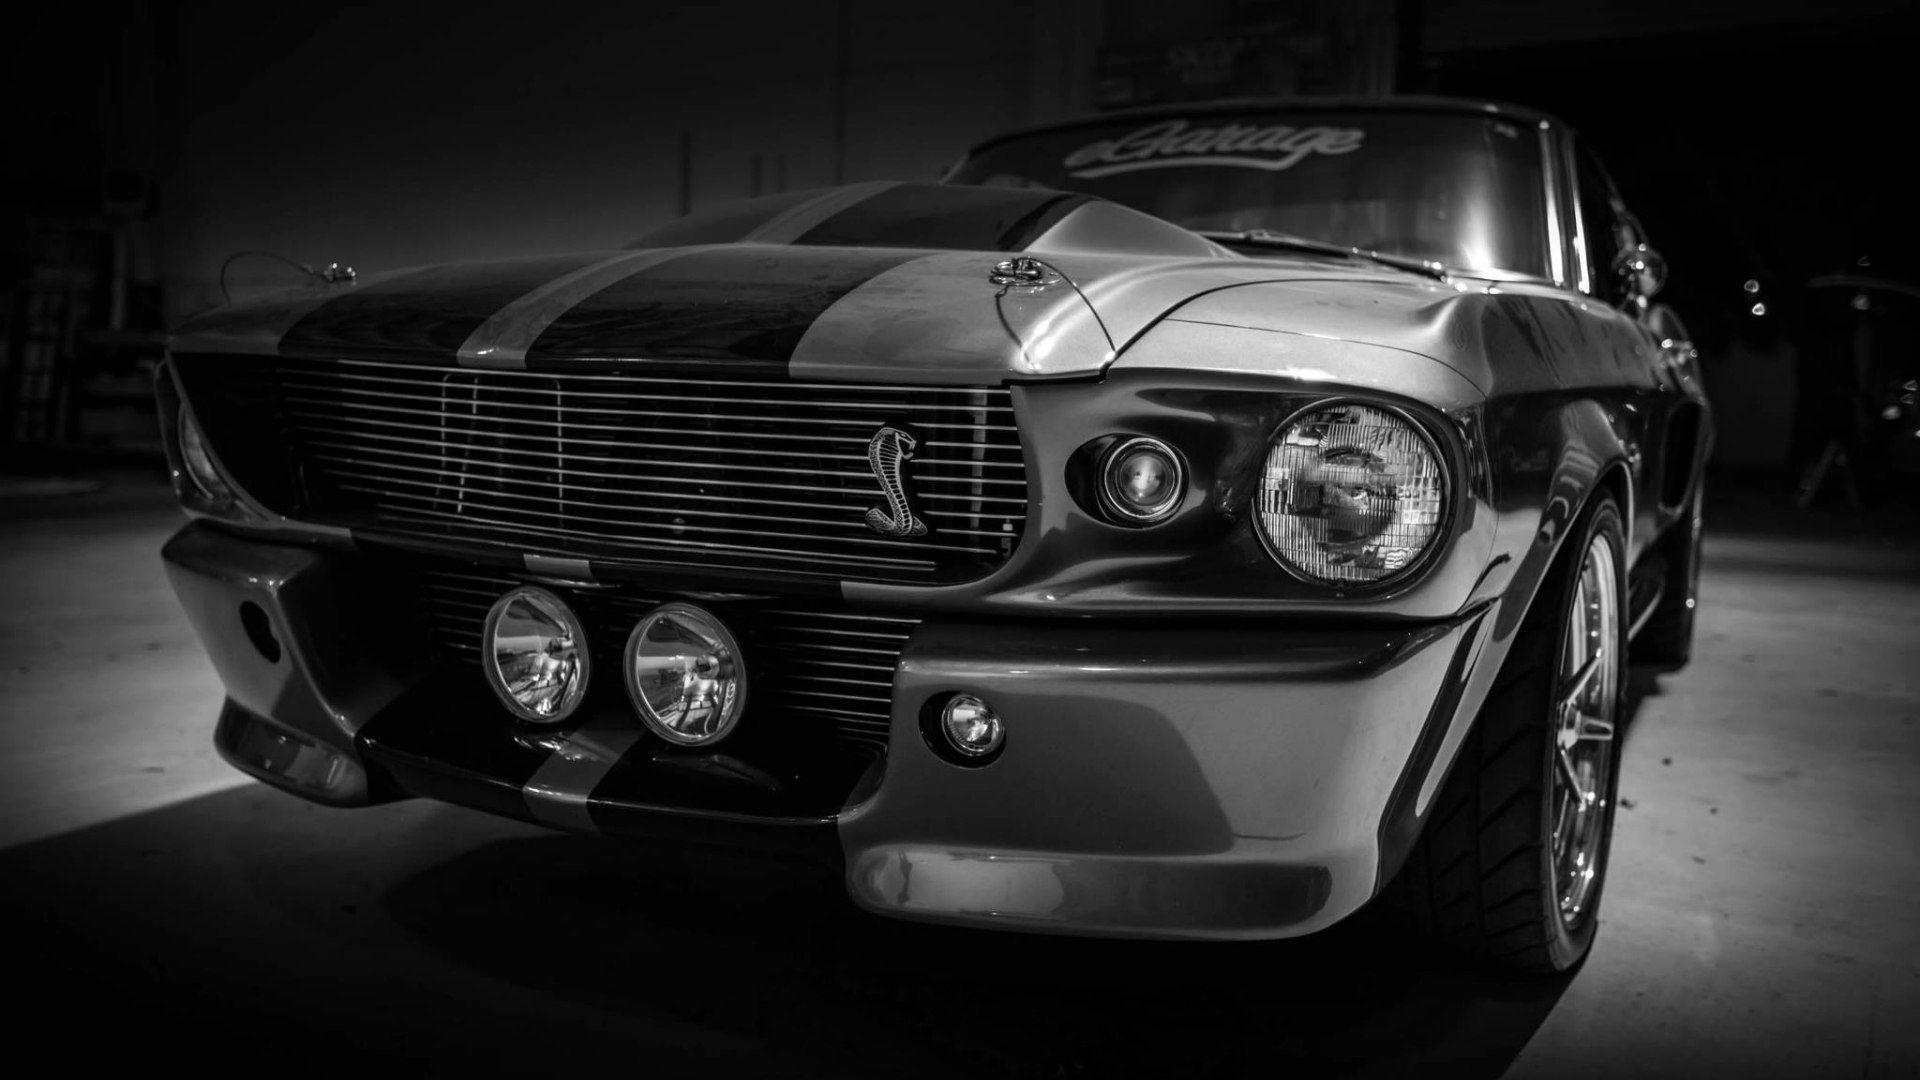 Ford Mustang Shelby GT500 Wallpapers 18